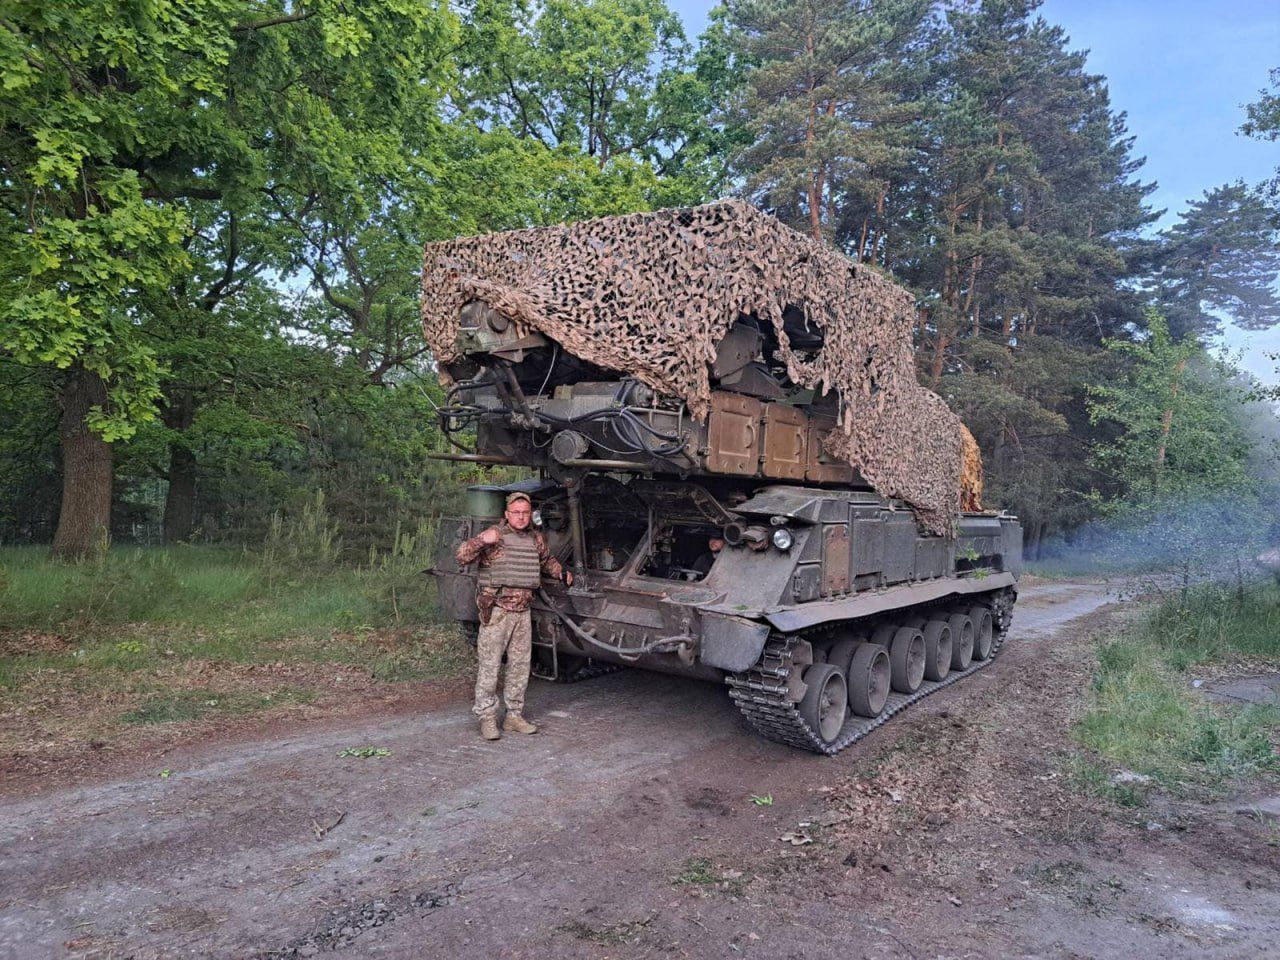 The Ukrainian FrankenSAM anti-aircraft system based on the post-Soviet Buk-M1 integrated with Western missiles.